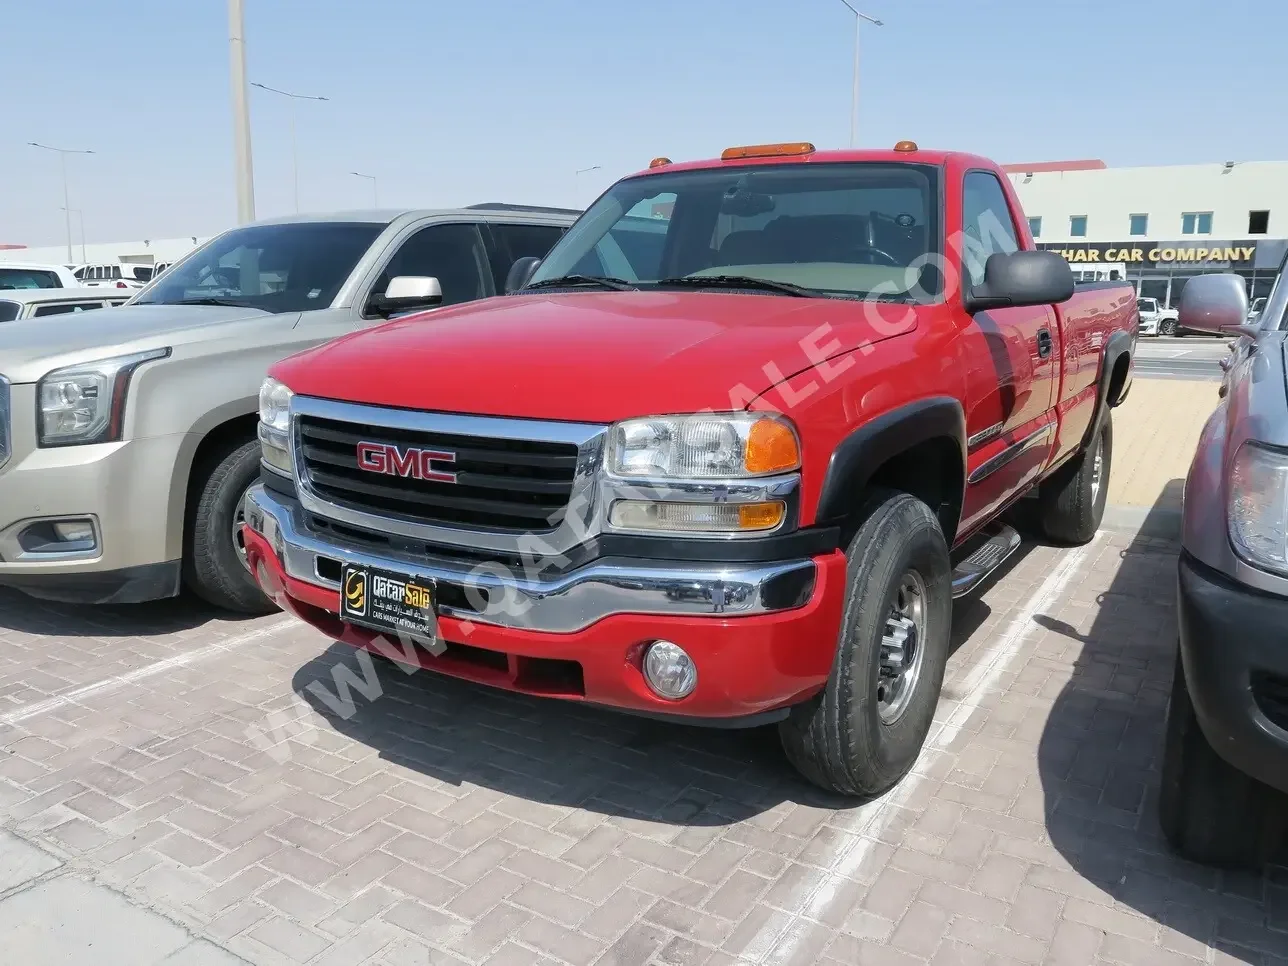 GMC  Sierra  2500 HD  2002  Manual  282,000 Km  8 Cylinder  Four Wheel Drive (4WD)  Pick Up  Red